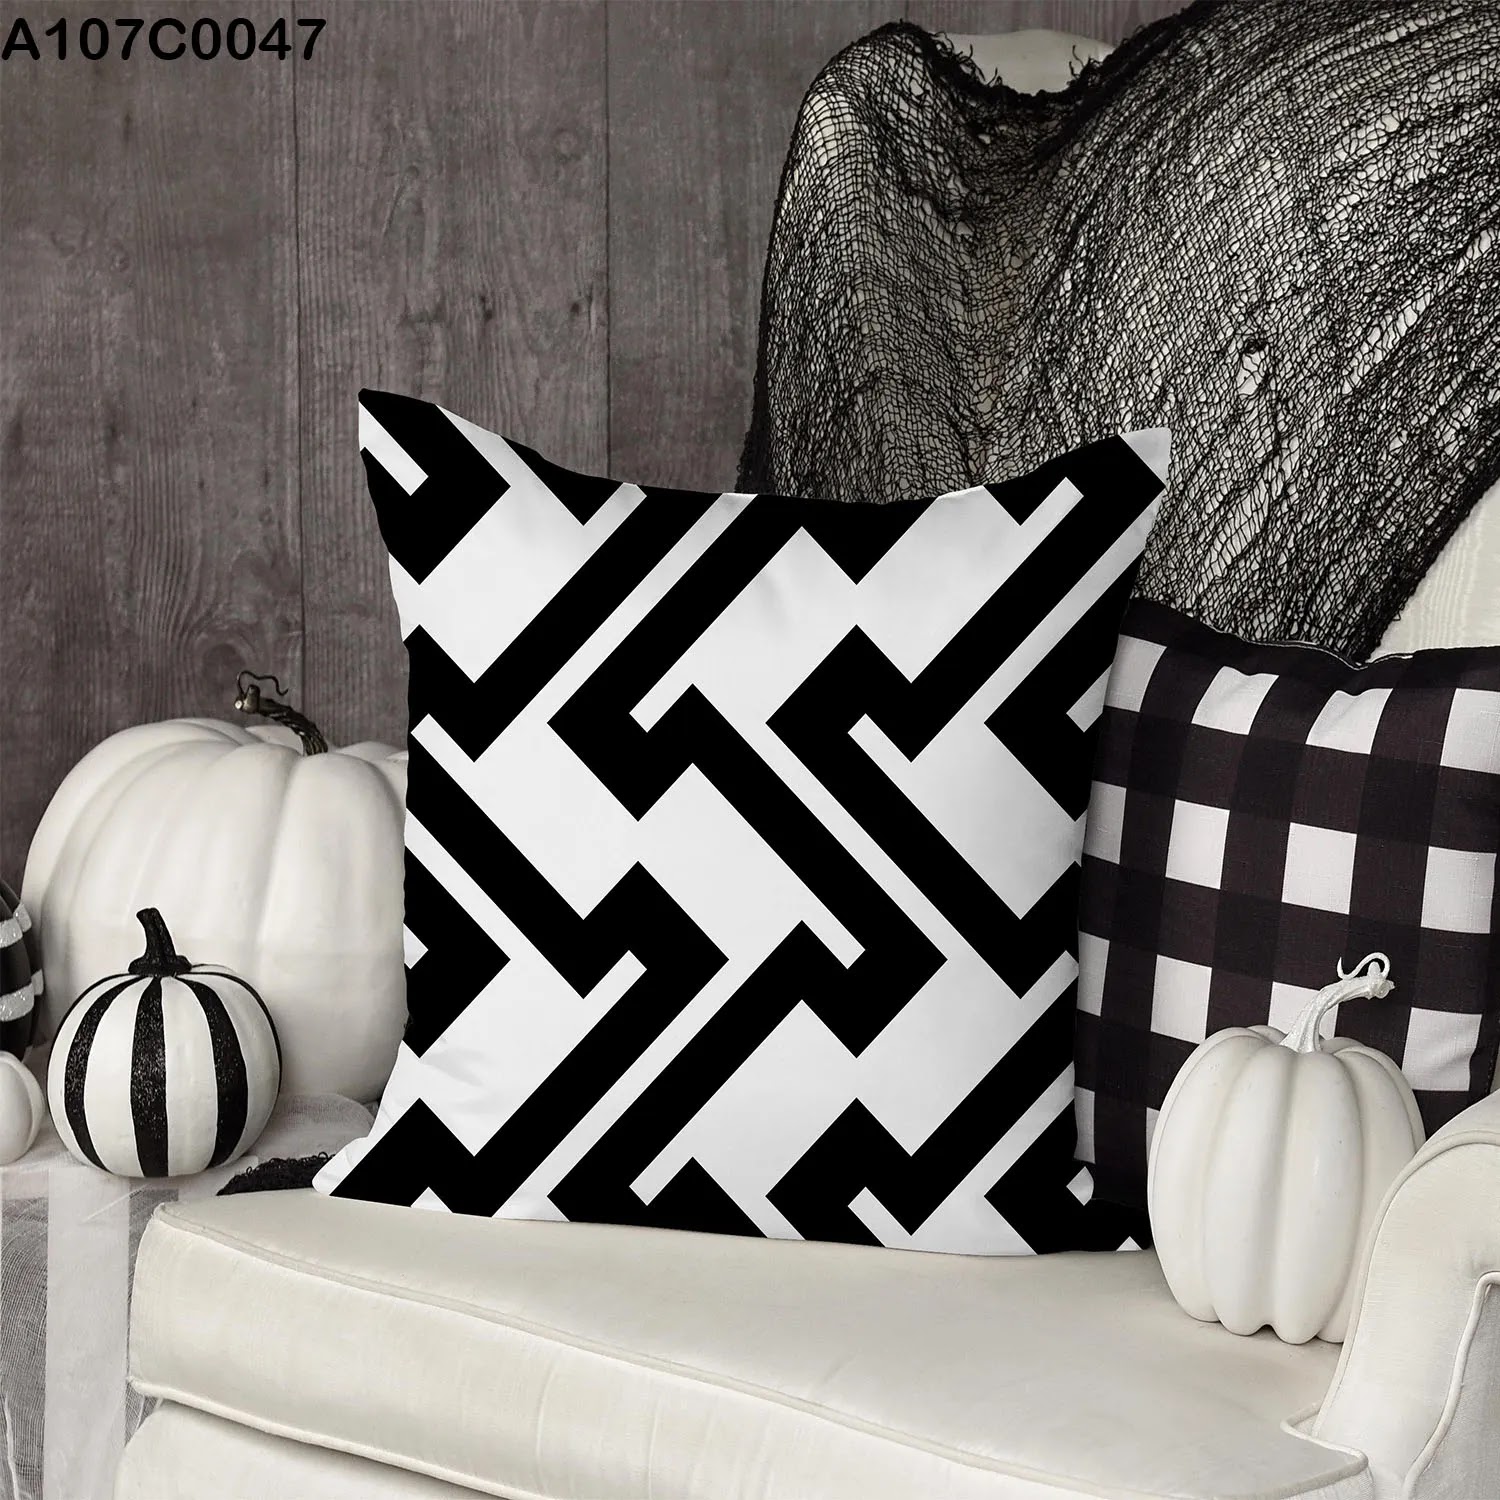 White pillow case with wide black lines